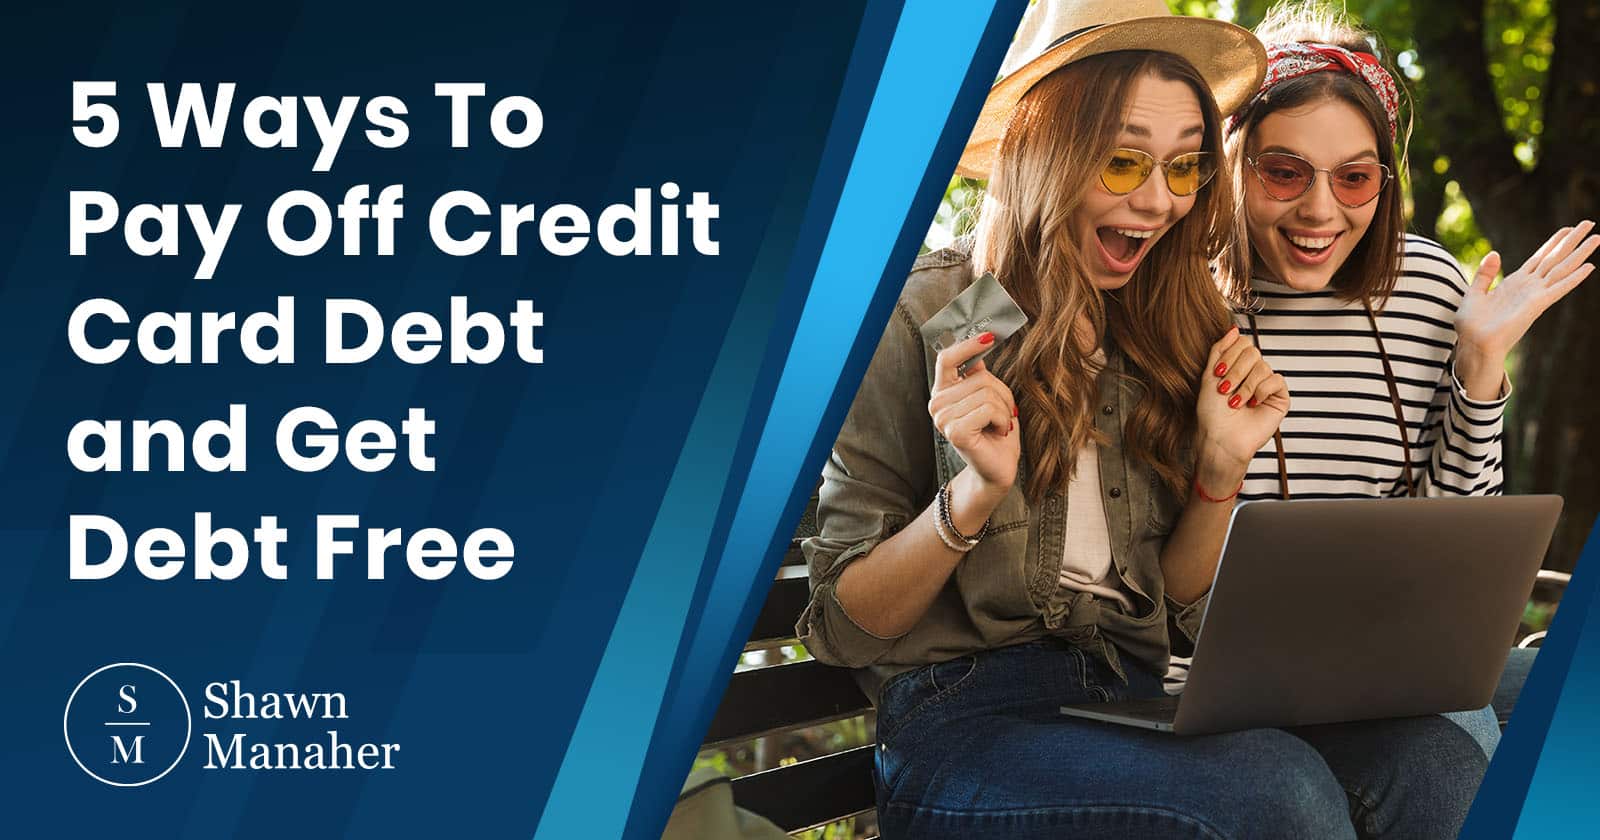 5 Ways To Pay Off Credit Card Debt and Get Debt Free